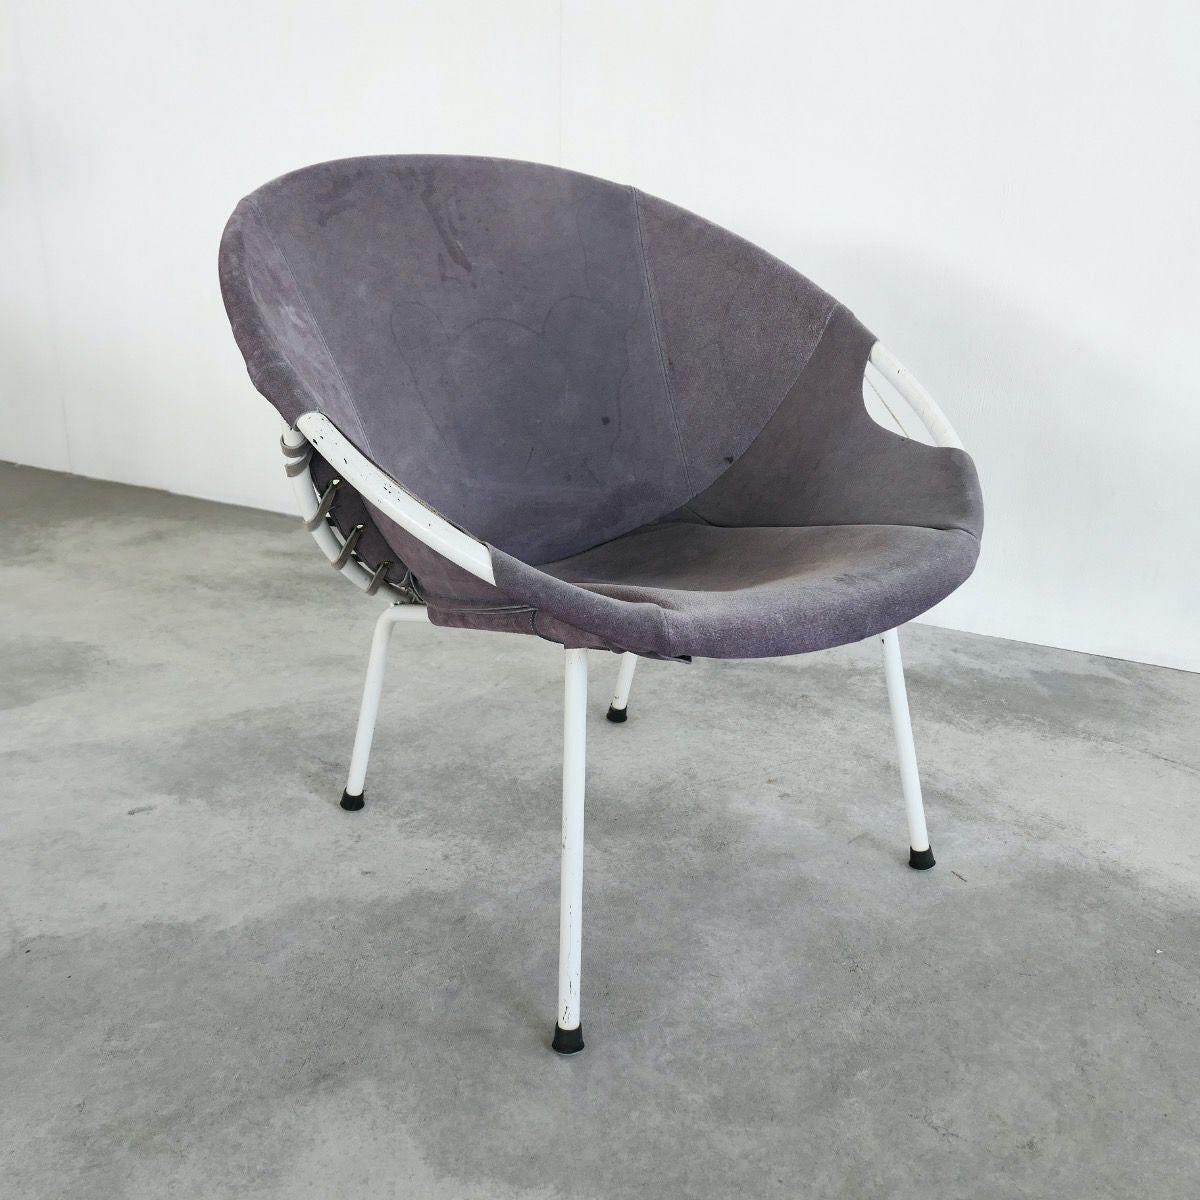 Hand-Crafted Balloon Lounge Chair in Suede, 1960s For Sale